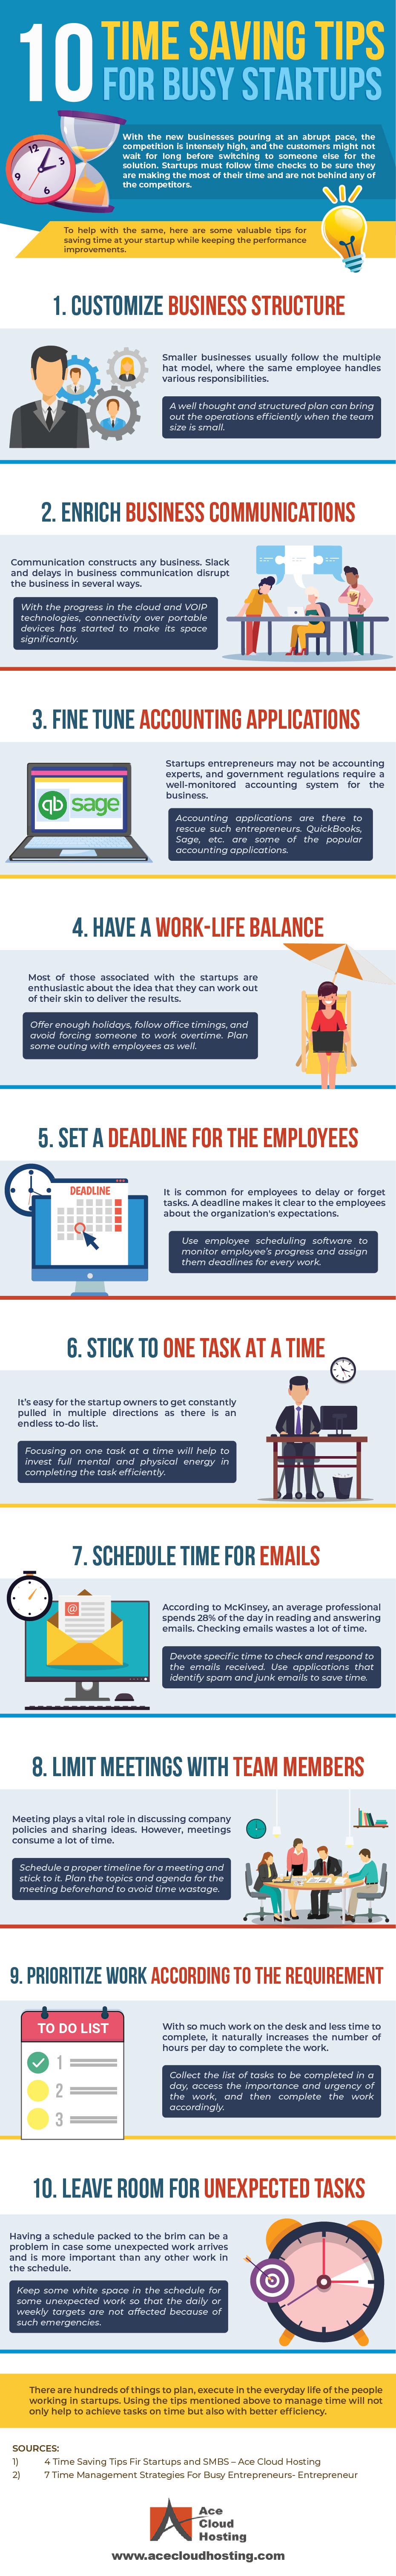 10 Time-Saving Tips For Busy Startups [Infographic]